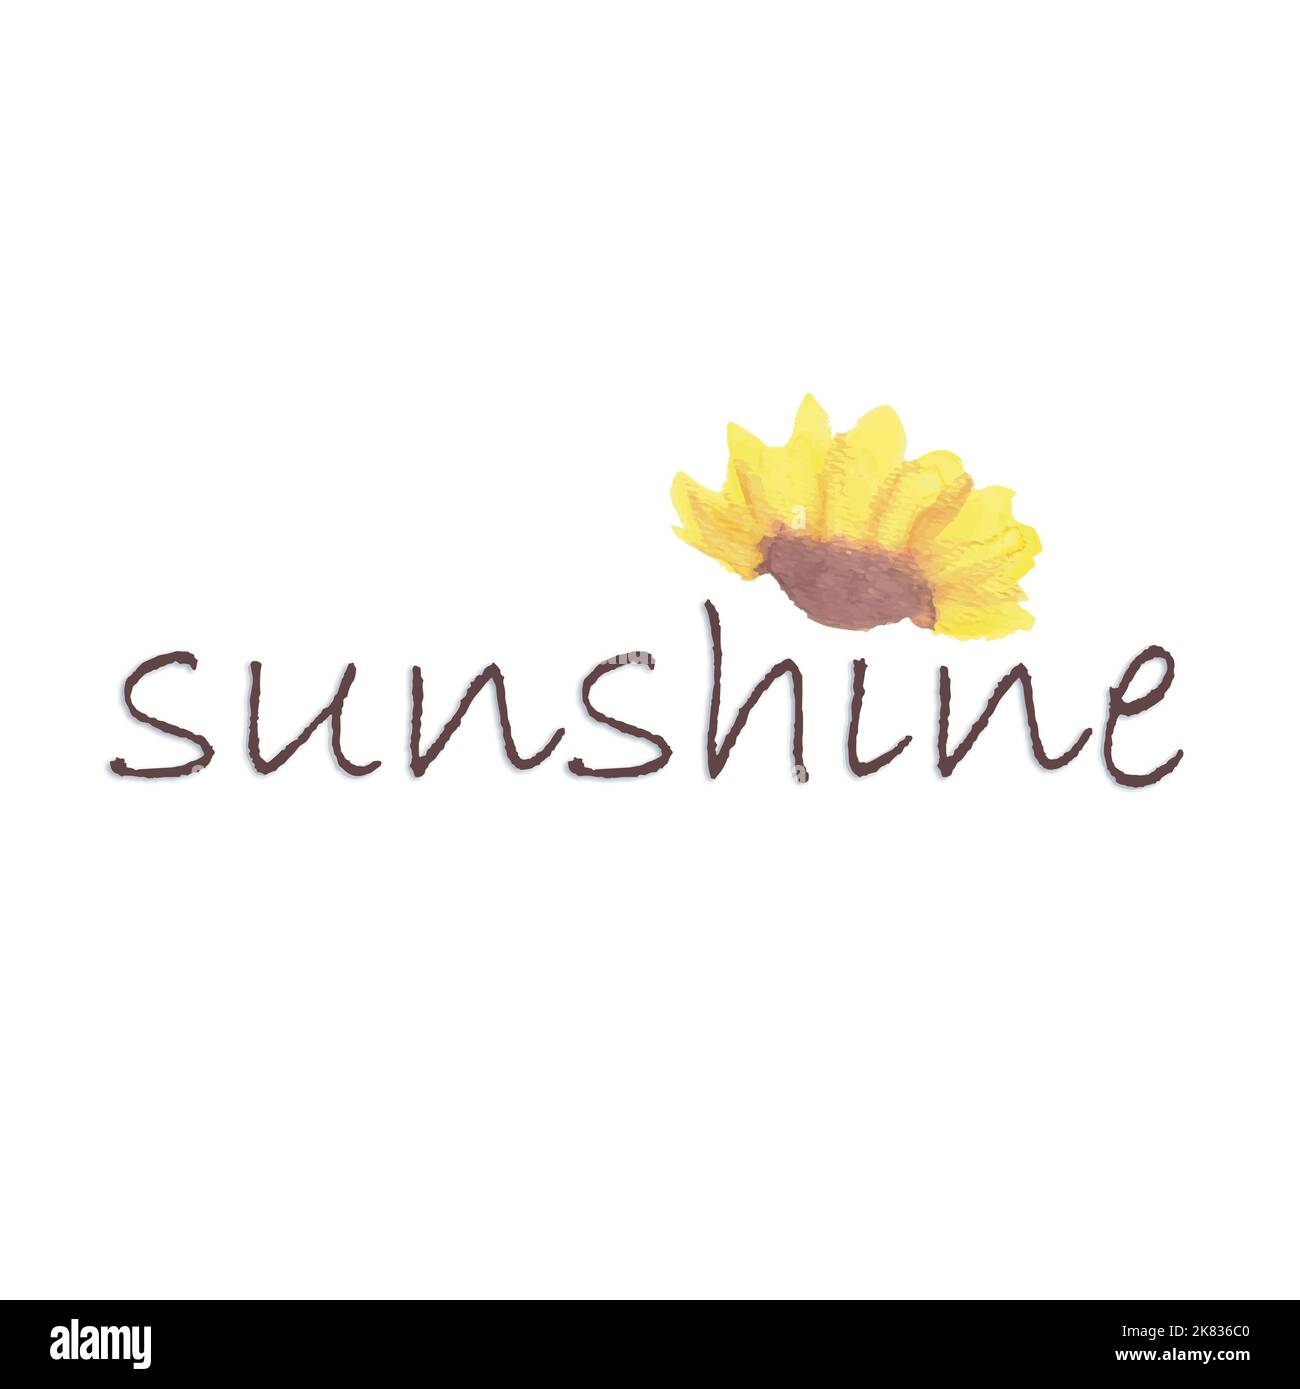 Sunflower short quotes Sunshine watercolor Stock Vector